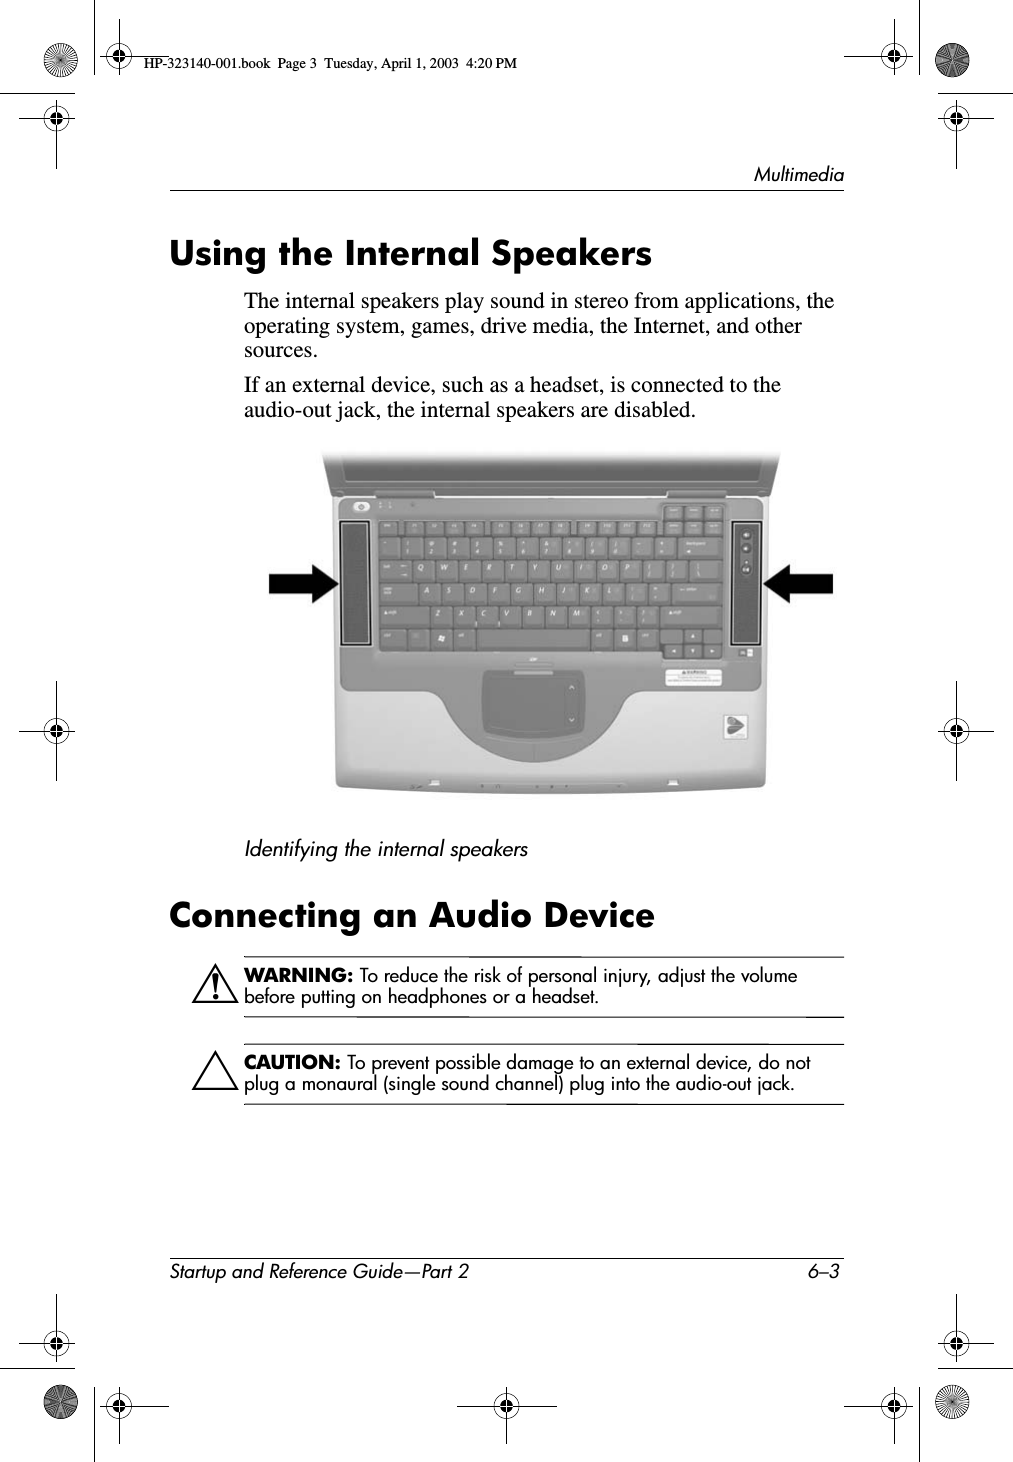 MultimediaStartup and Reference Guide—Part 2 6–3Using the Internal SpeakersThe internal speakers play sound in stereo from applications, the operating system, games, drive media, the Internet, and other sources.If an external device, such as a headset, is connected to the audio-out jack, the internal speakers are disabled.Identifying the internal speakersConnecting an Audio DeviceÅWARNING: To reduce the risk of personal injury, adjust the volume before putting on headphones or a headset.ÄCAUTION: To prevent possible damage to an external device, do not plug a monaural (single sound channel) plug into the audio-out jack.HP-323140-001.book  Page 3  Tuesday, April 1, 2003  4:20 PM